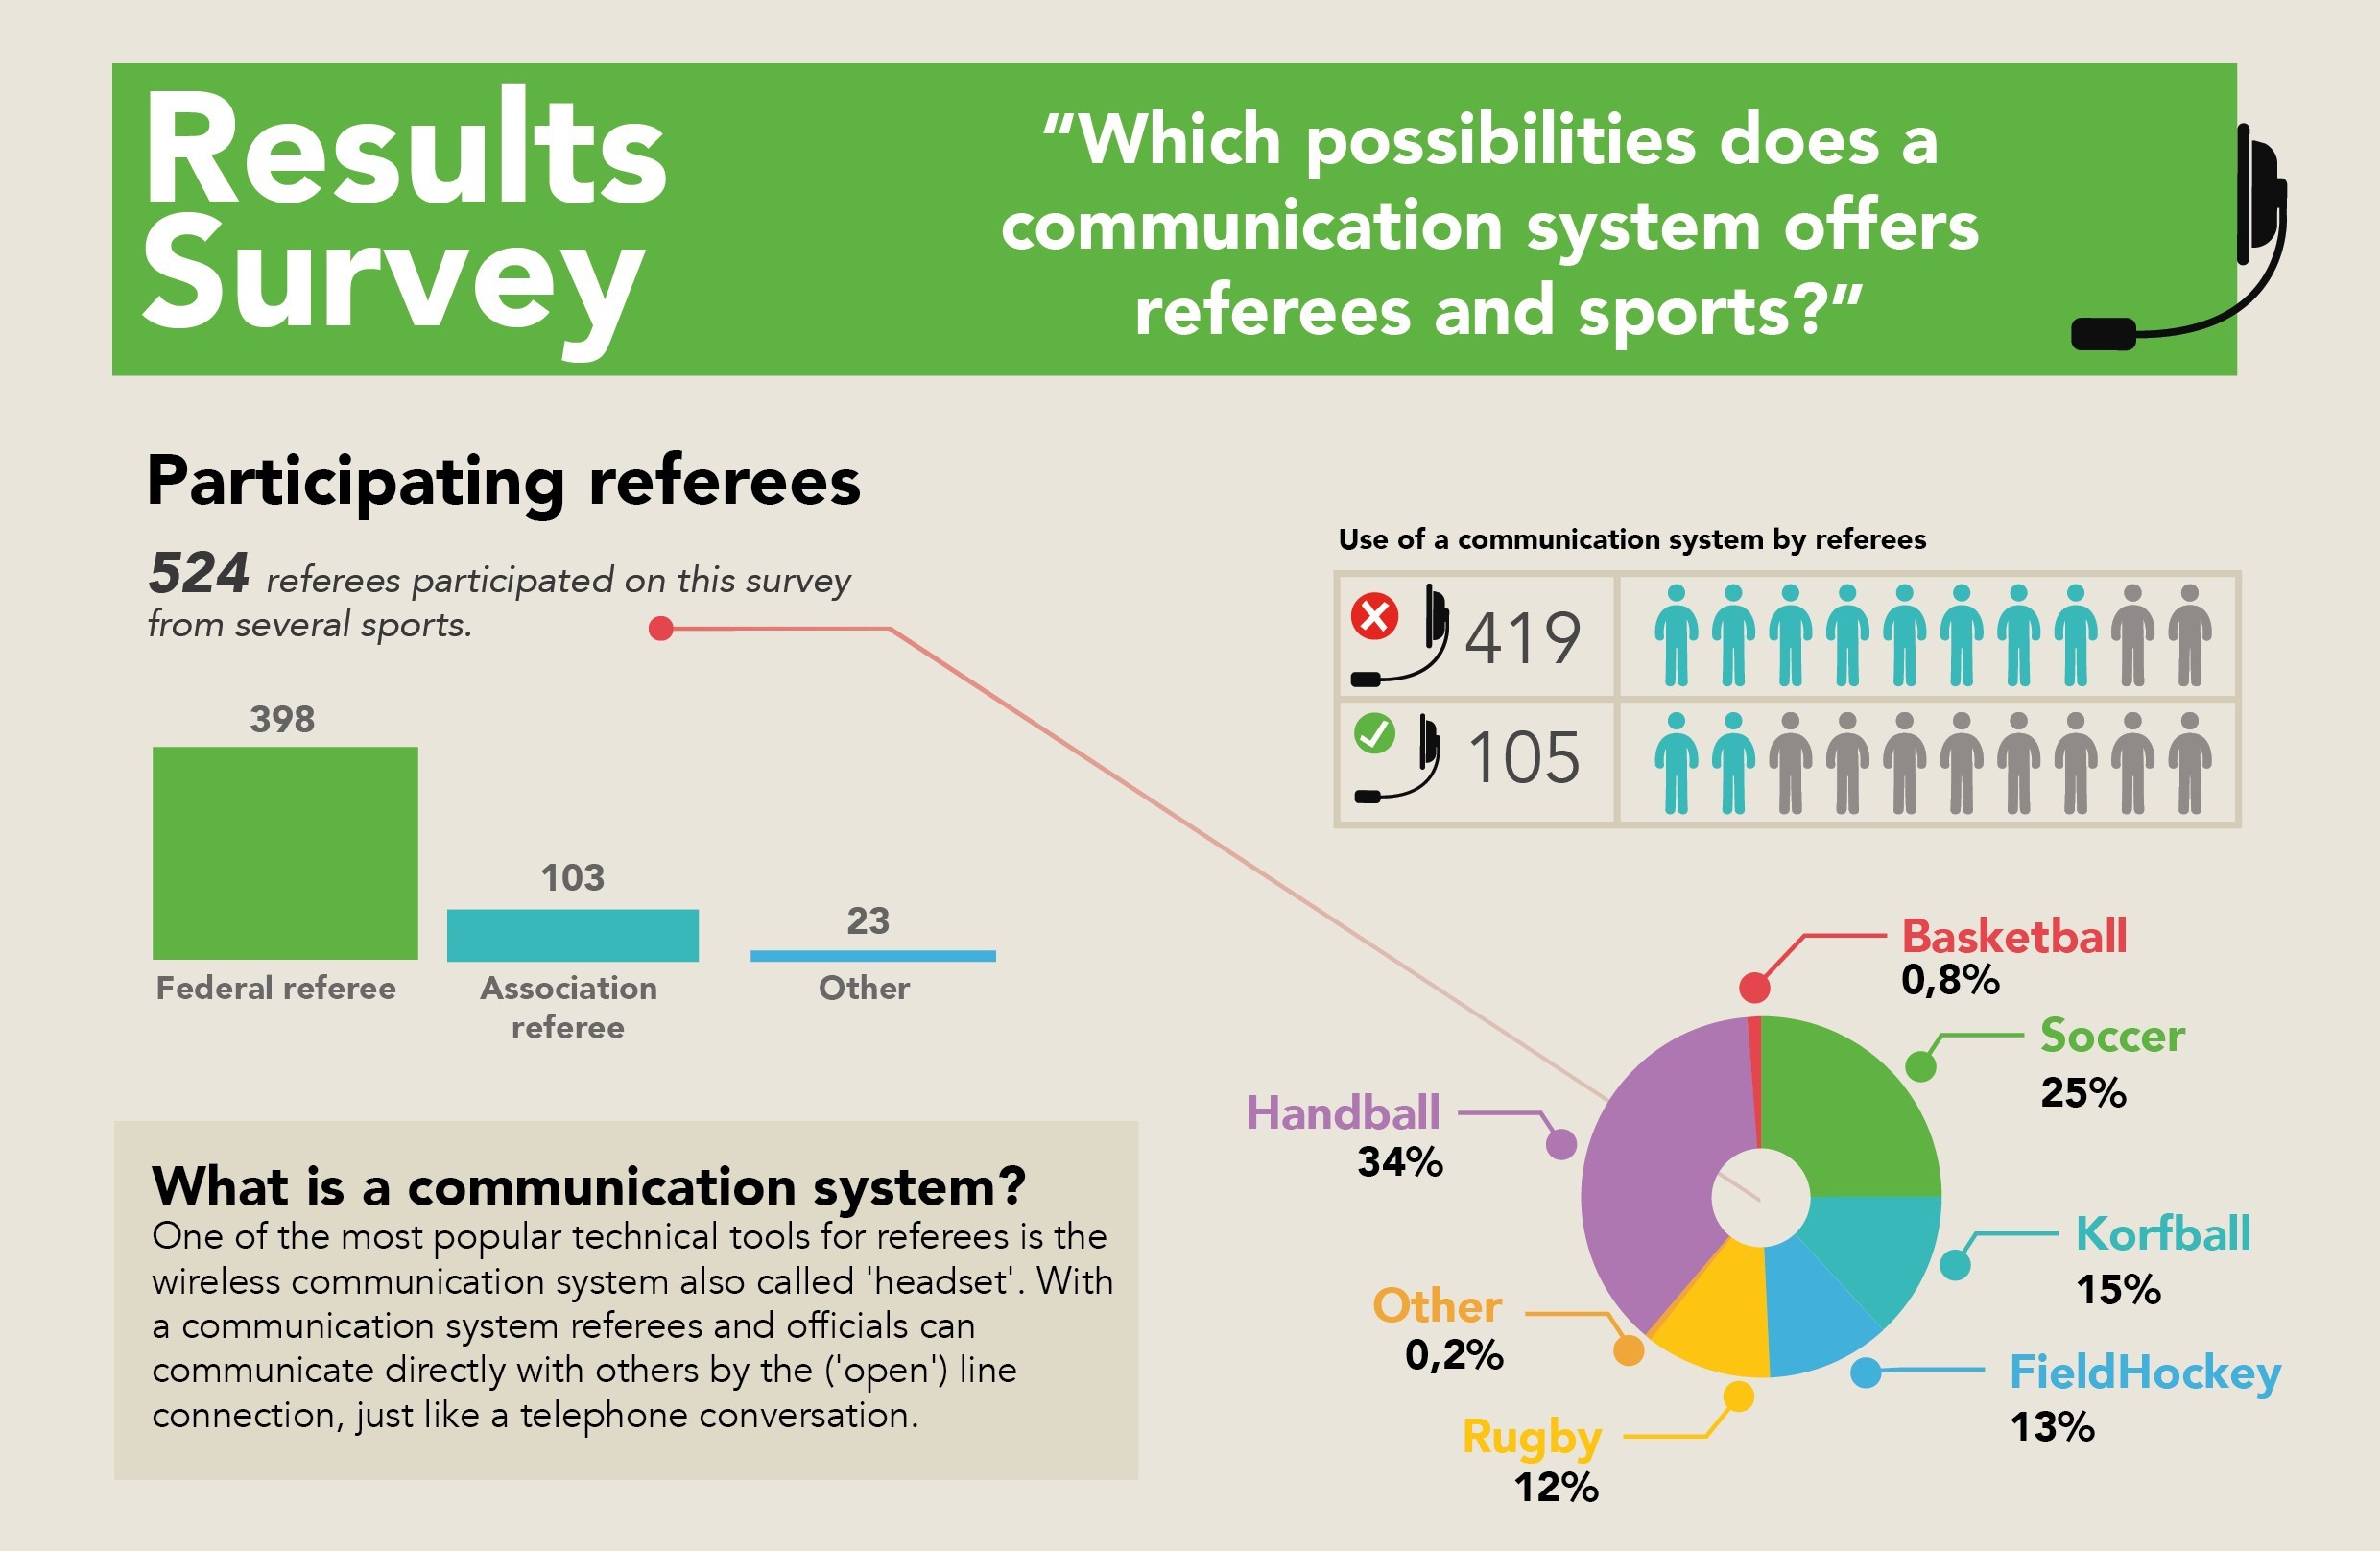 /infographic-which-possibilities-does-a-communication-system-offers-referees-and-sports-axiwi